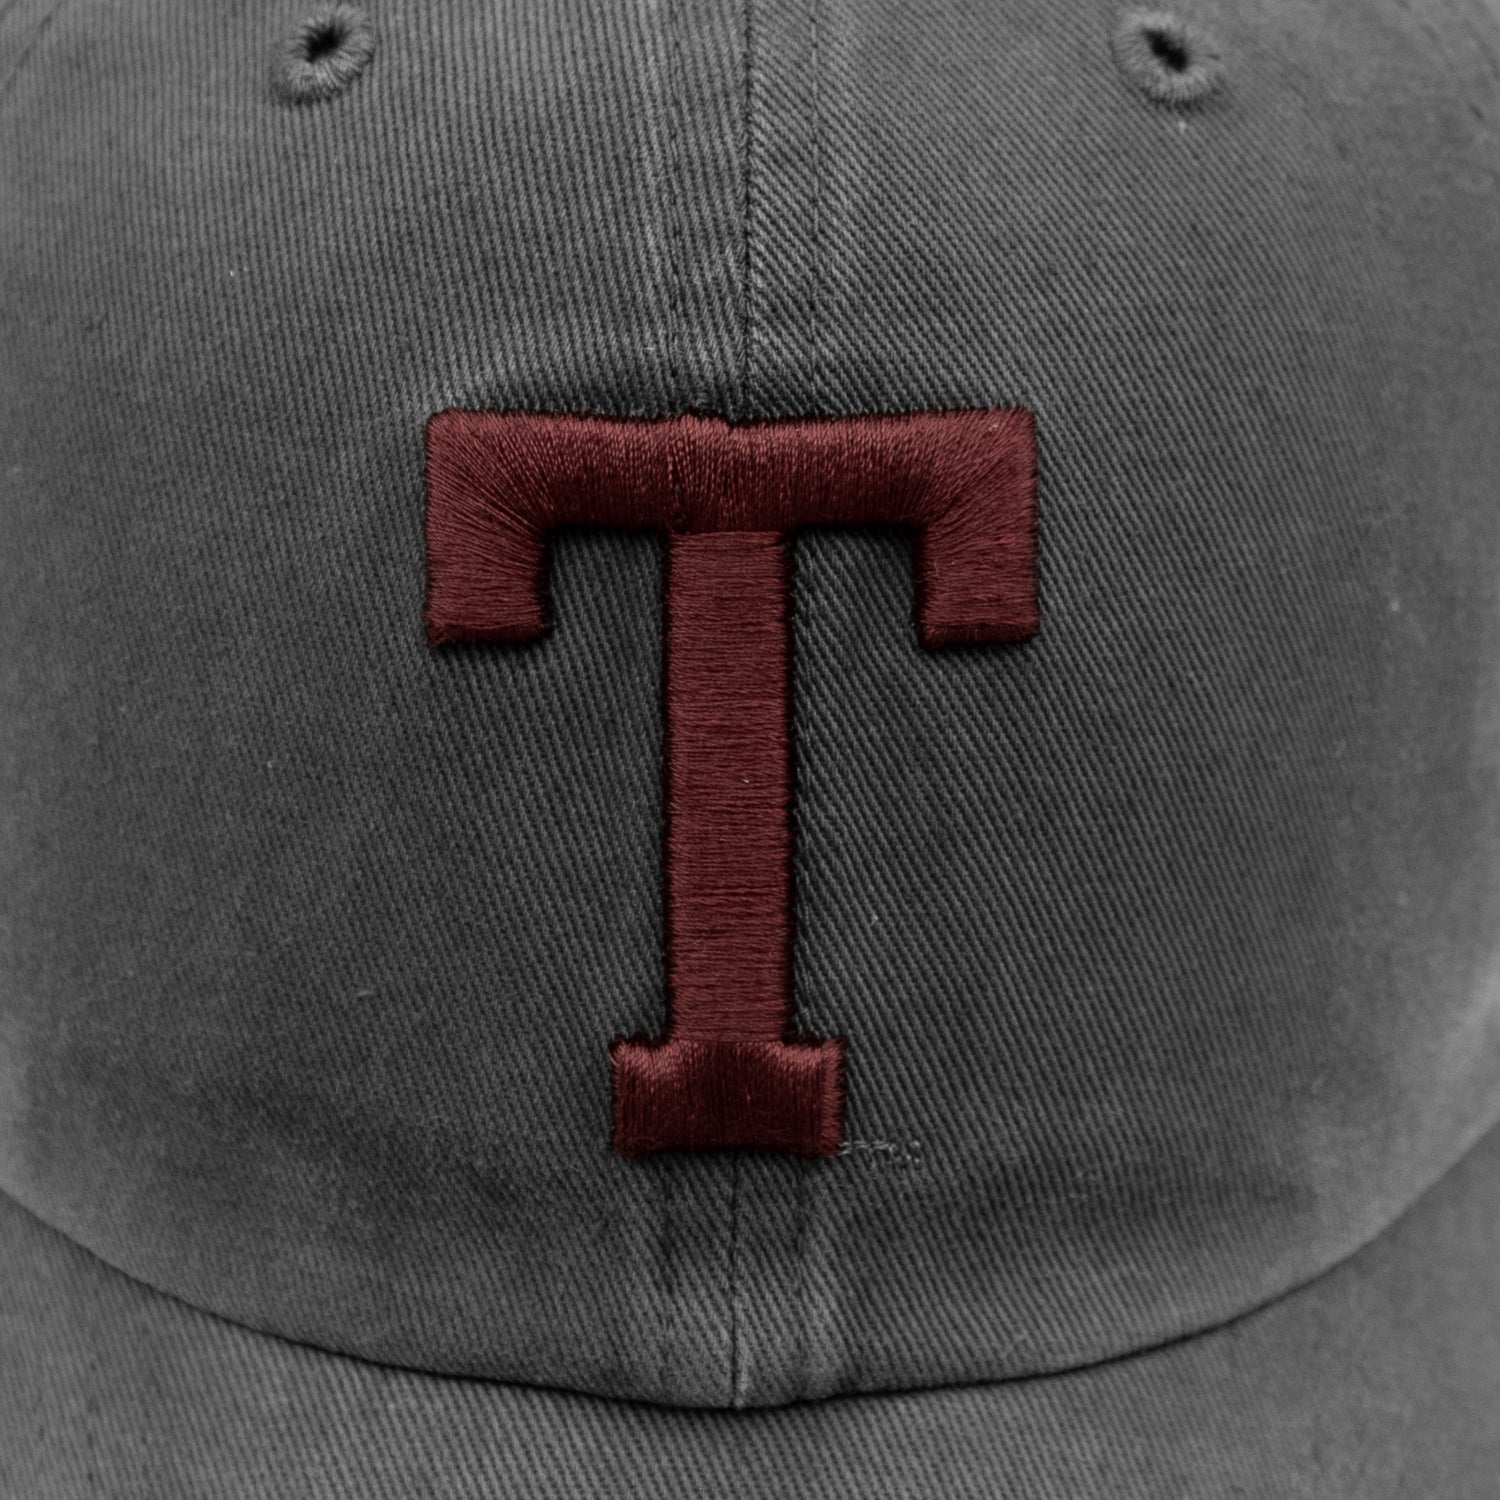 Texas A&M '47 Brand Block T Charcoal Clean Up Hat